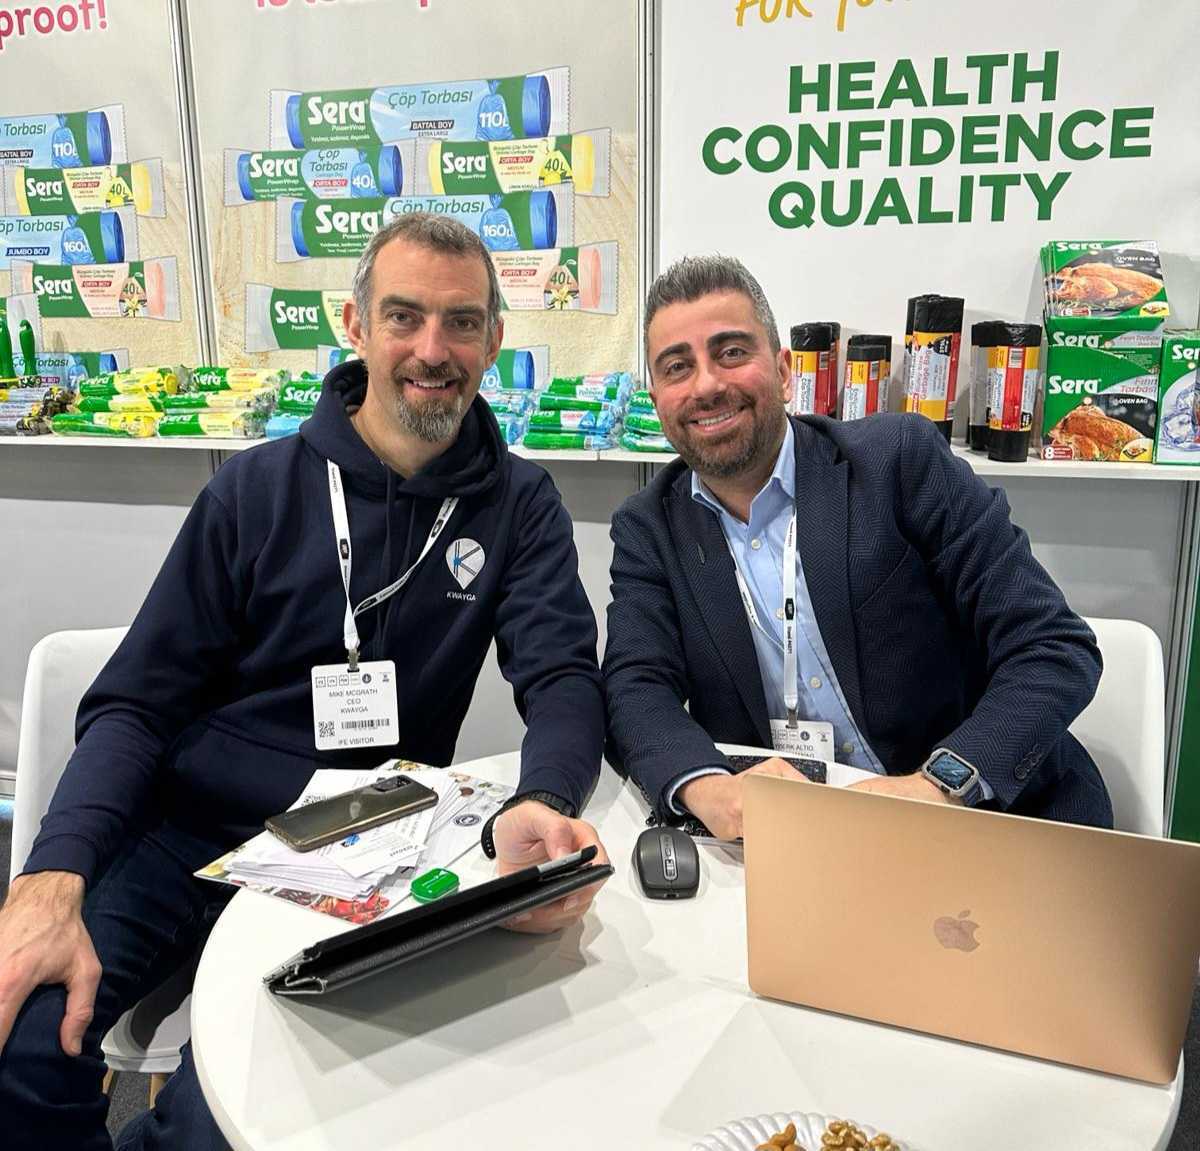 Last week our CEO, Mike McGrath, had a great time at #IFE24 meeting current members and onboarding new ones. Thrilled to welcome Turkey's food giant, @YildizHoldingTR, to Kwayga! It's amazing to see Kwayga's continual #growth and impact within the #foodindustry. 🚀🚀 #Tradeshow